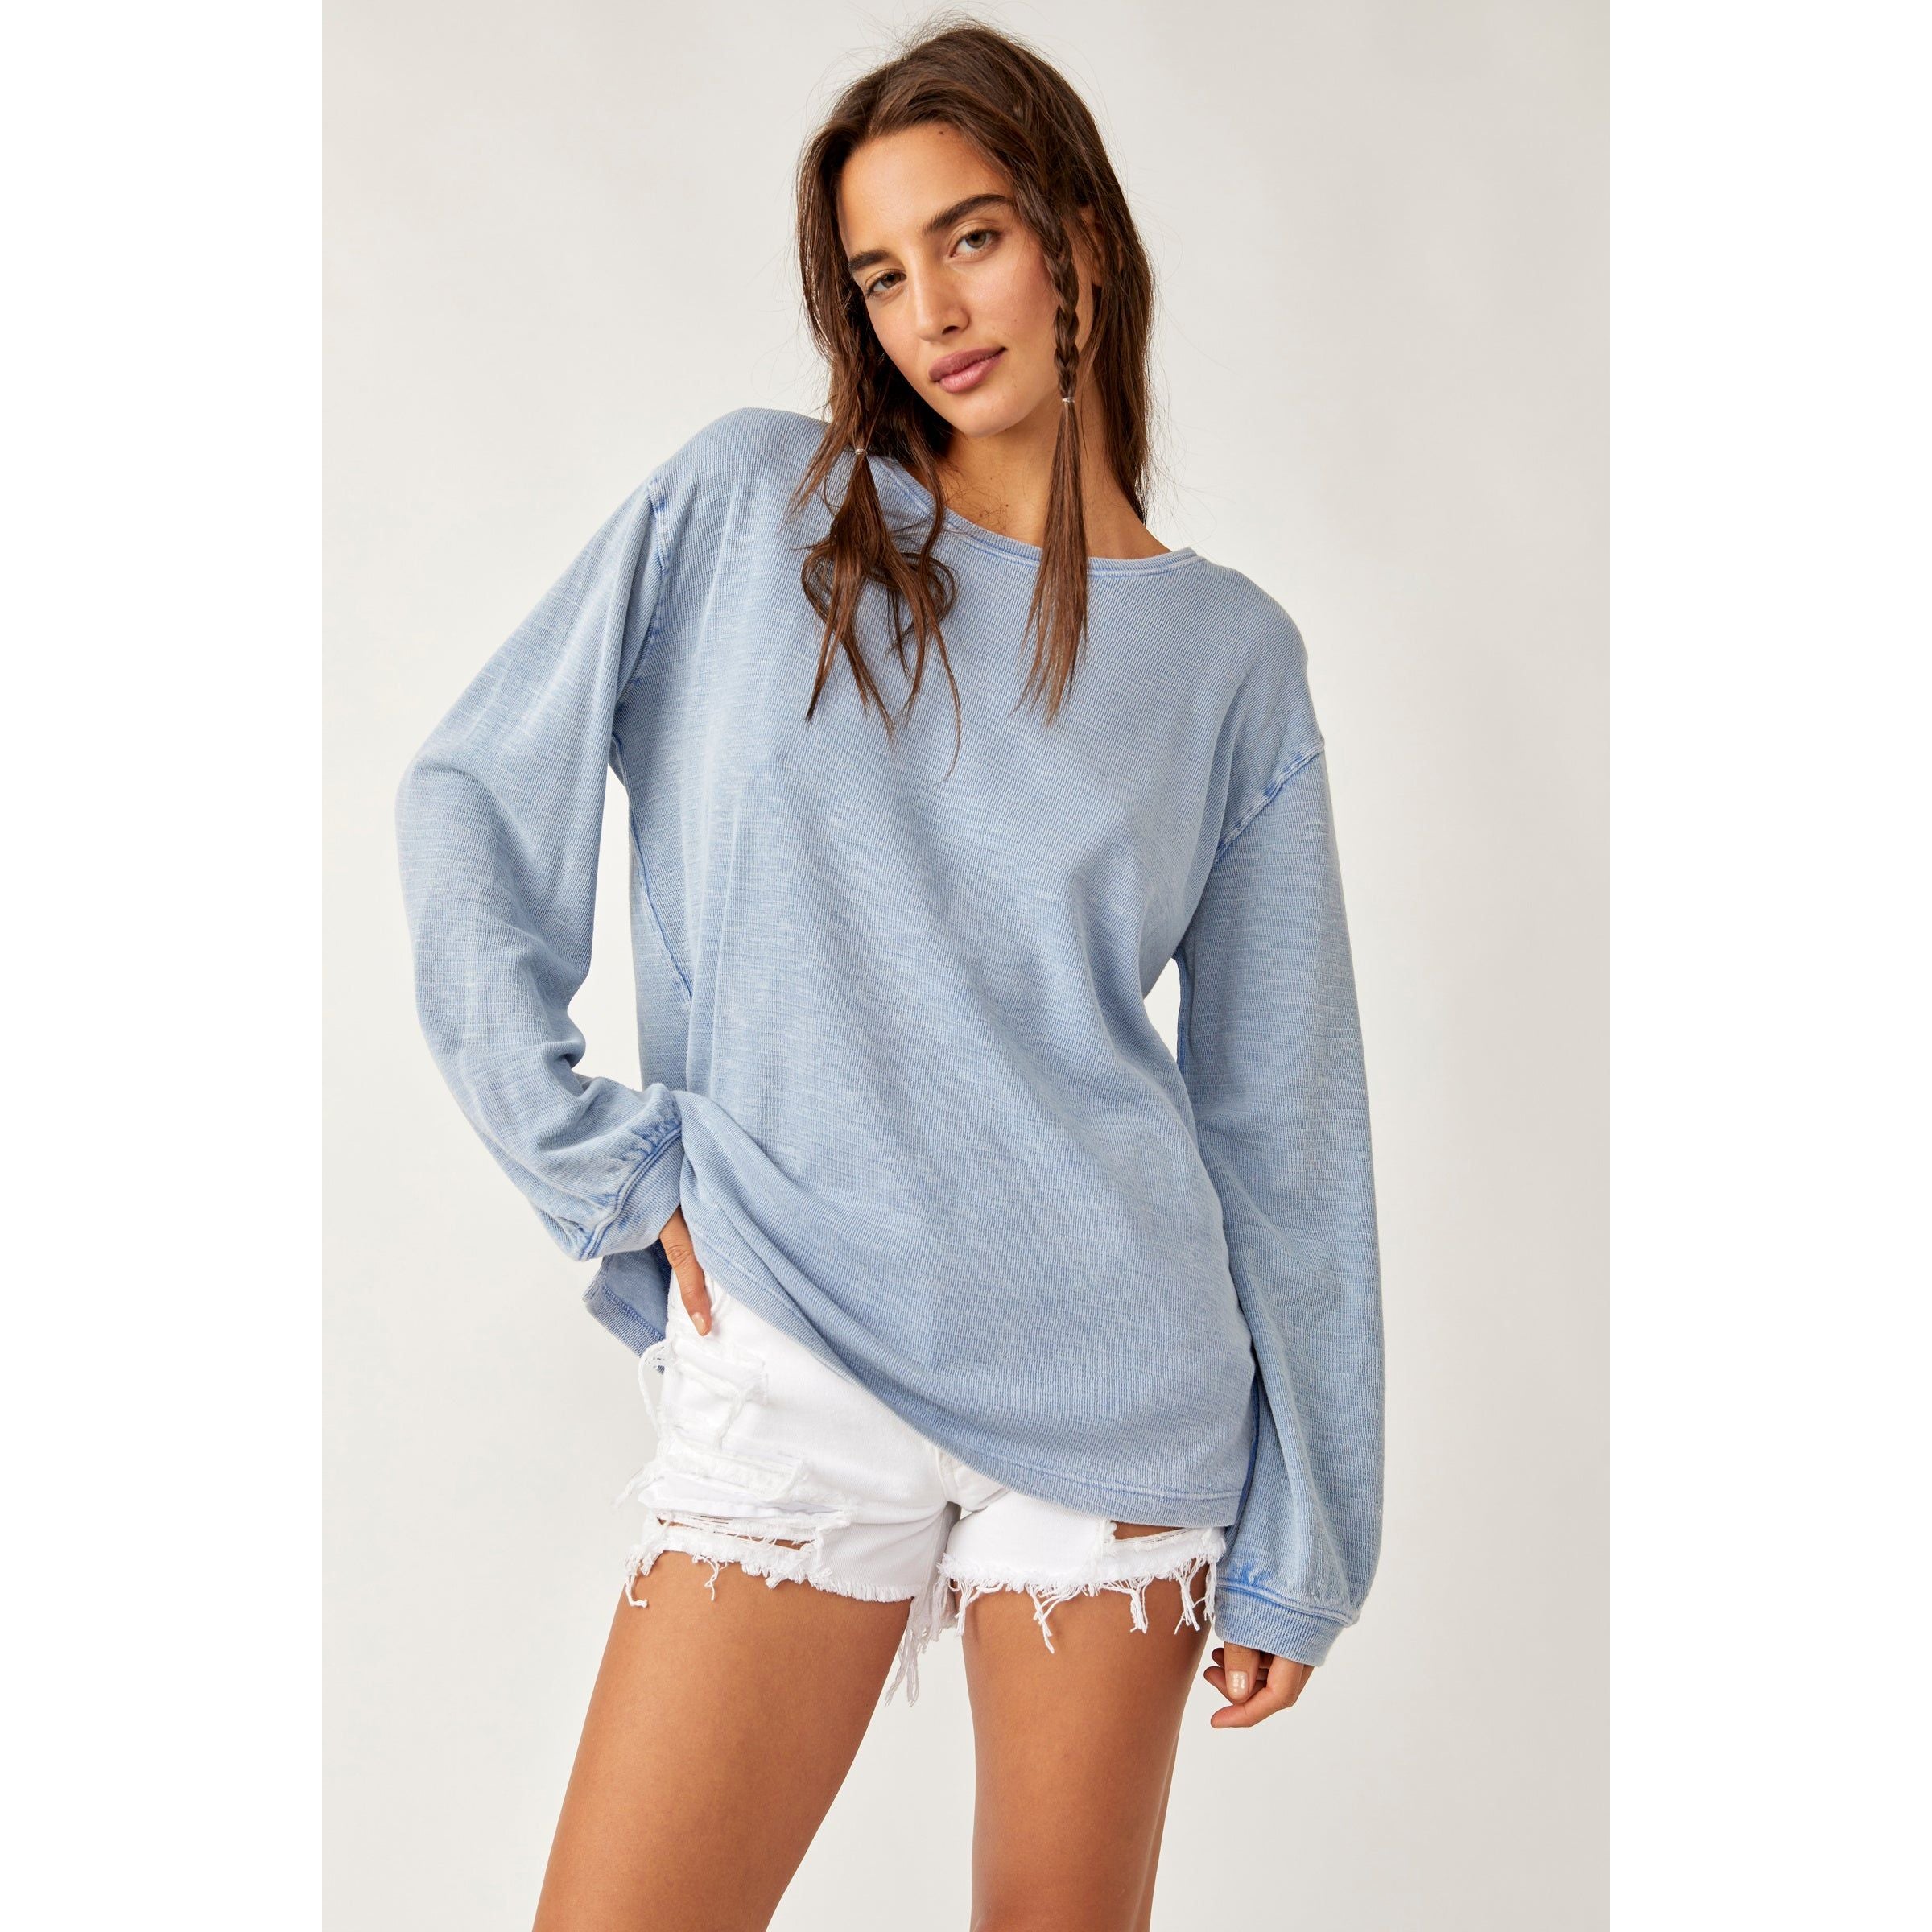 Free People, Shop Free People for dresses, t-shirts and knitwear